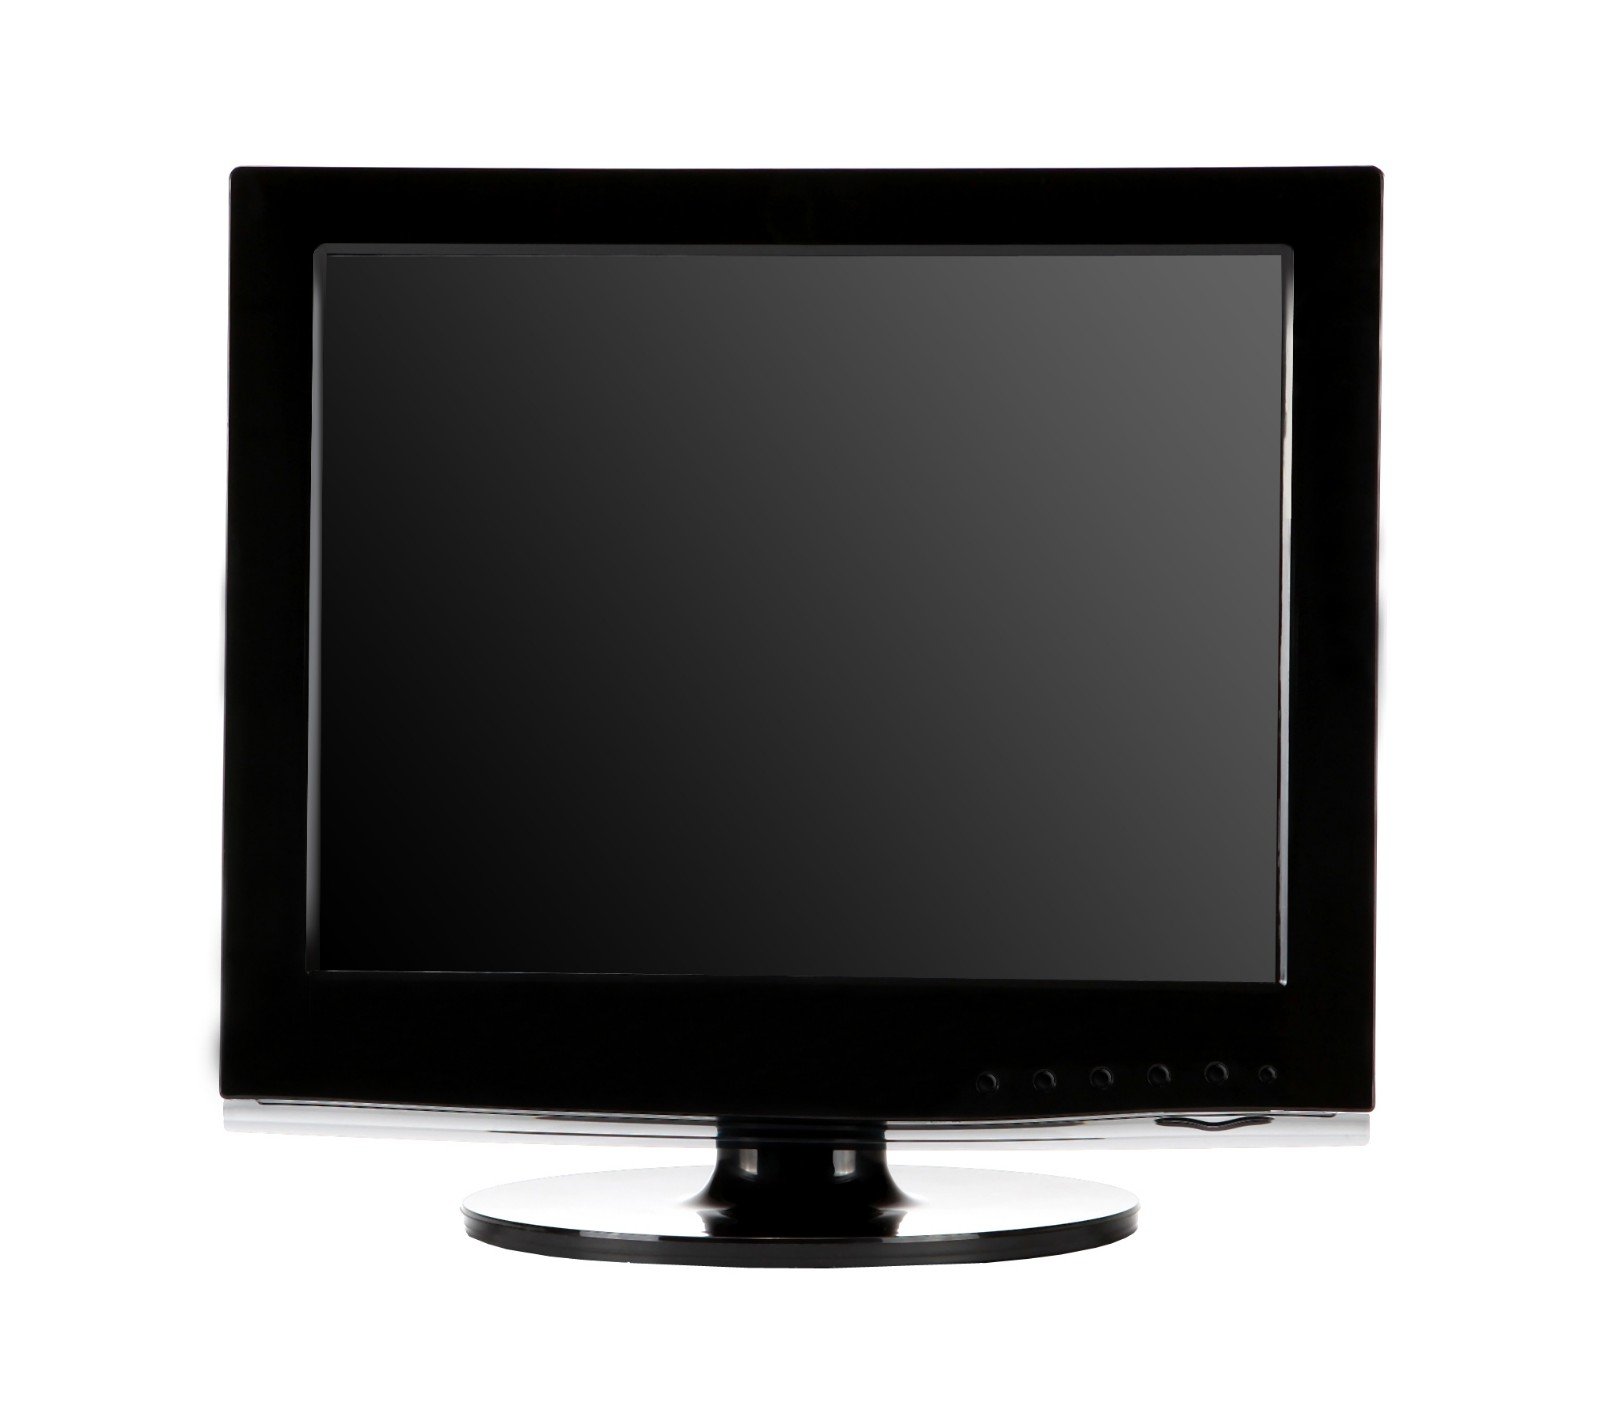 Xinyao LCD professional design monitor 15 lcd with hdmi output for tv screen-1